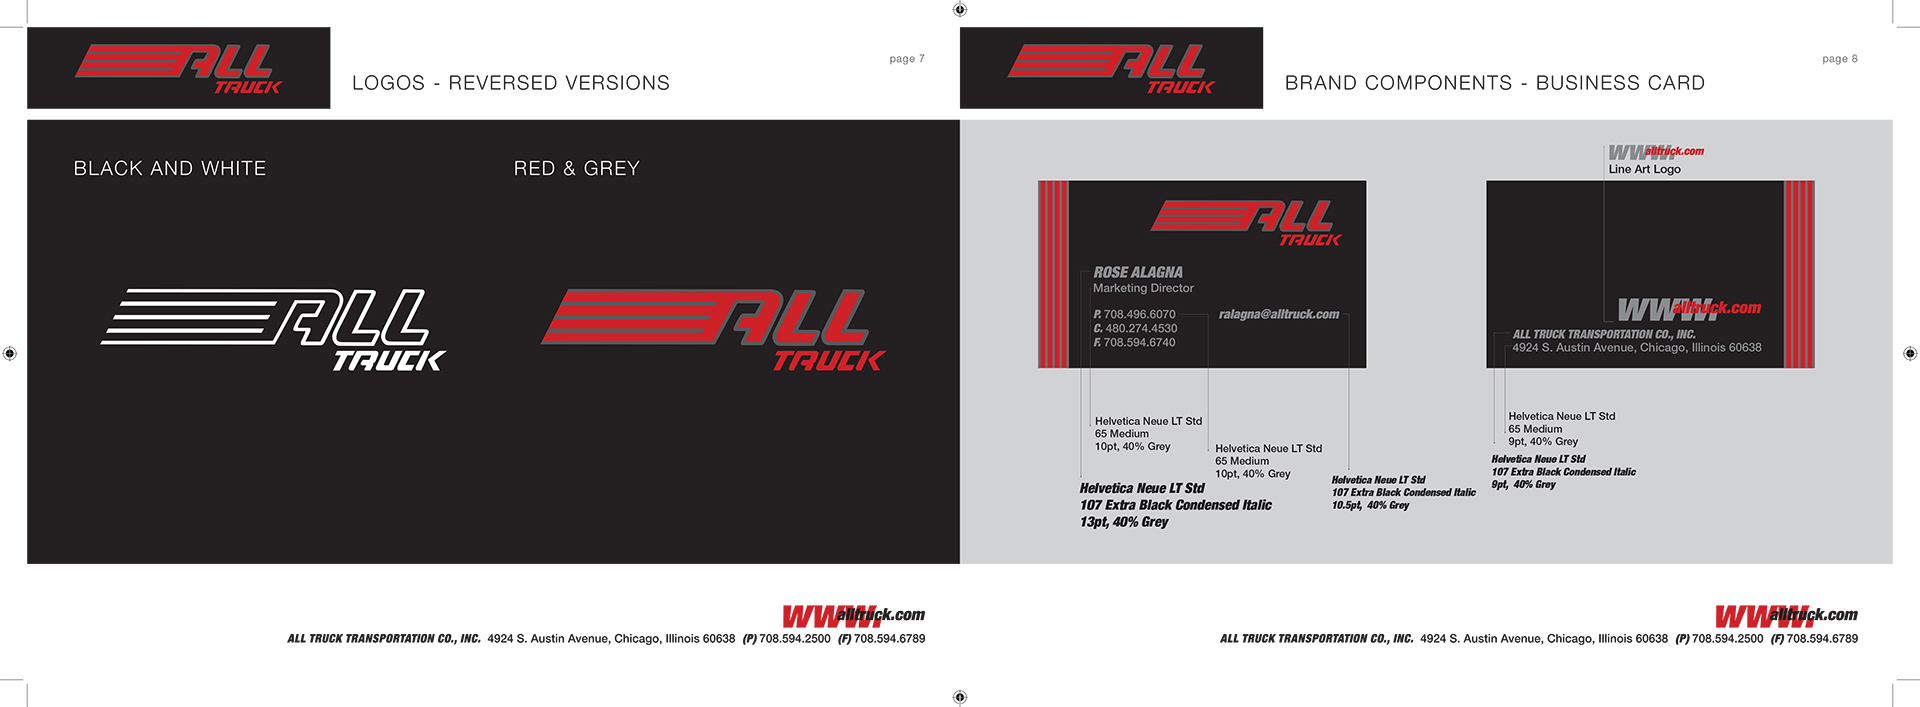 All Truck USA Corporate Identity Standards Manual